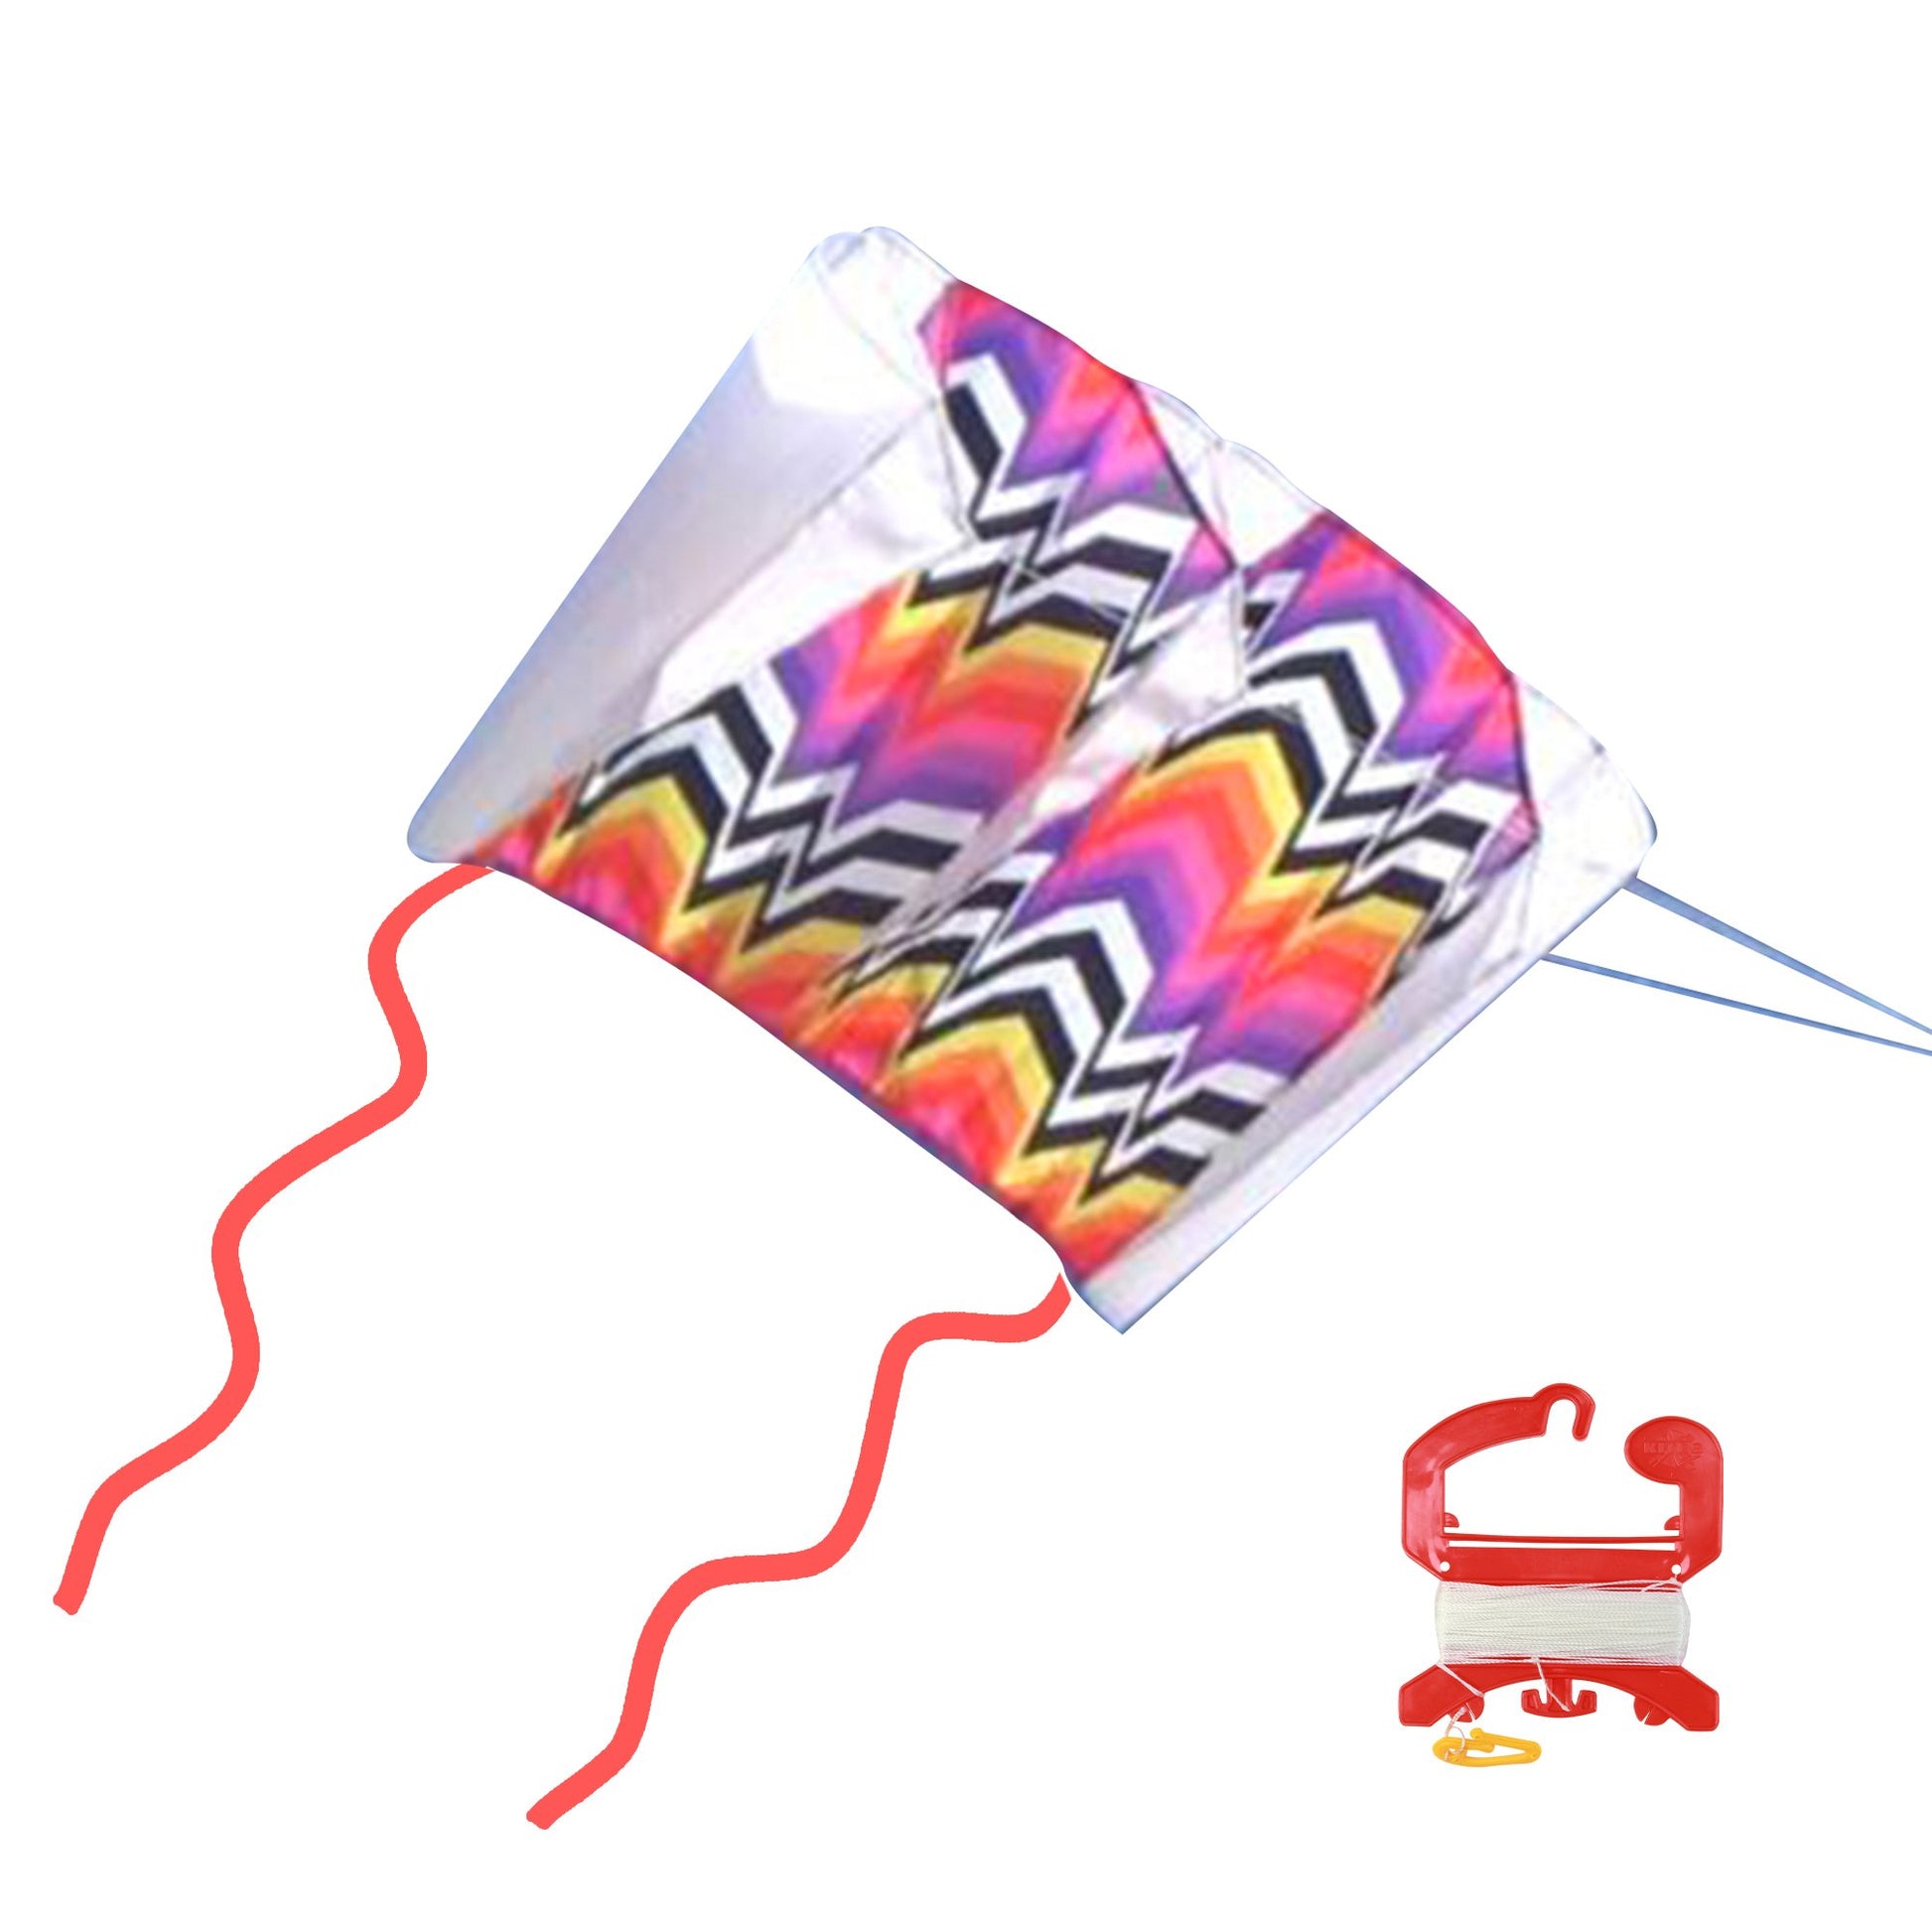 X Kites SkyFoil ZigZag + Pocket Kite Isometric Parafoil Kite Bundle - No Assembly Required photo showing handle